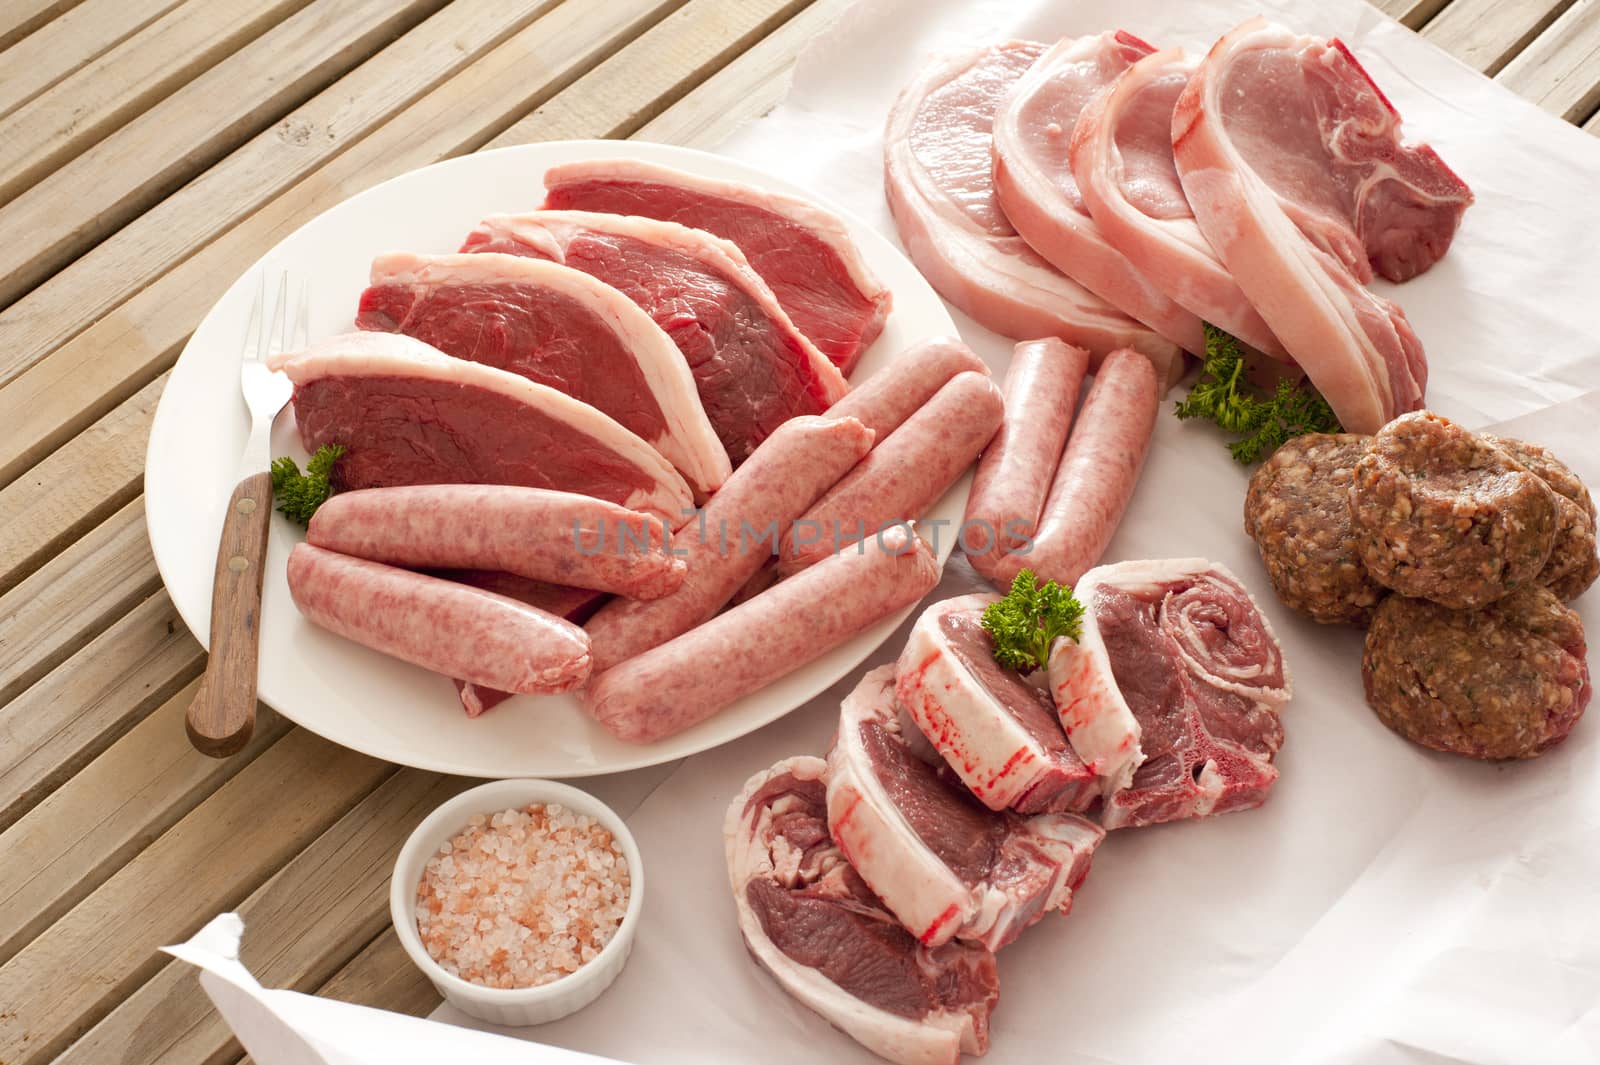 Large assortment of raw meat on a table with sausages, pork, lamp chops patties and beef steaks ready for a summer BBQ